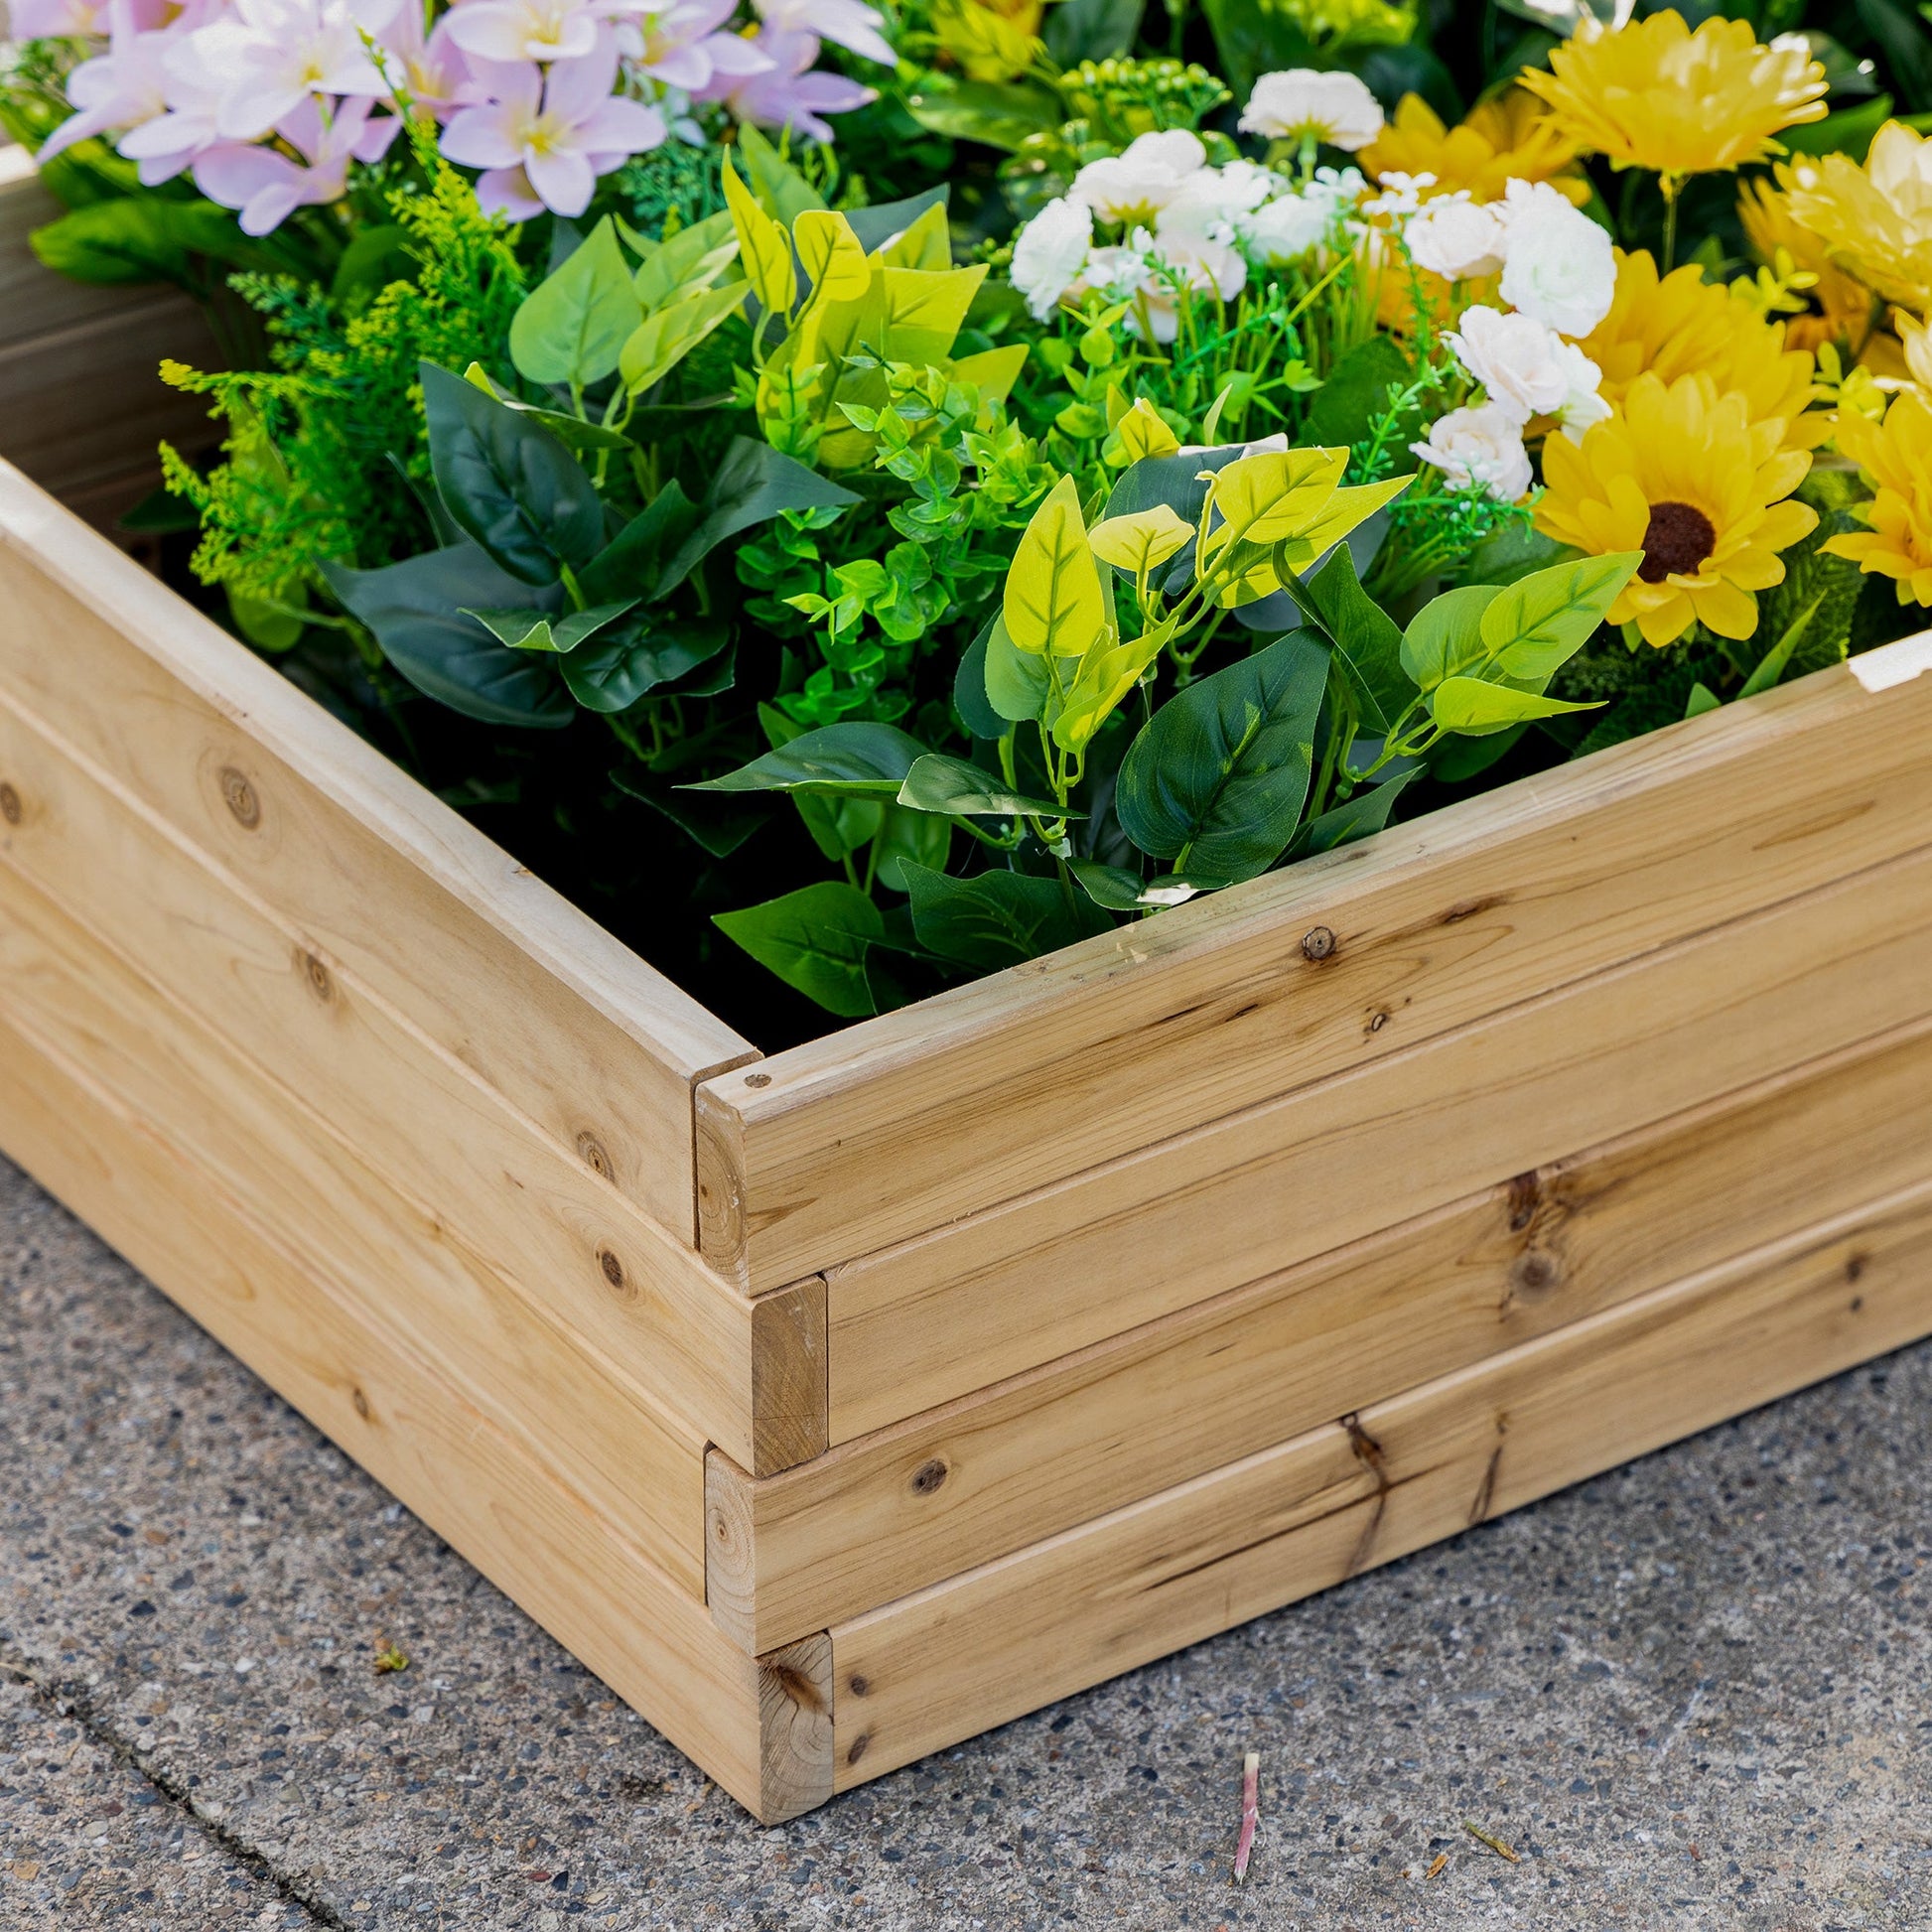 47" x 24" x 9" Raised Garden Bed, Outdoor Wooden Planter Box for Growing Vegetables, Flowers, Fruits, Herbs, and Succulents, Easy Assembly at Gallery Canada